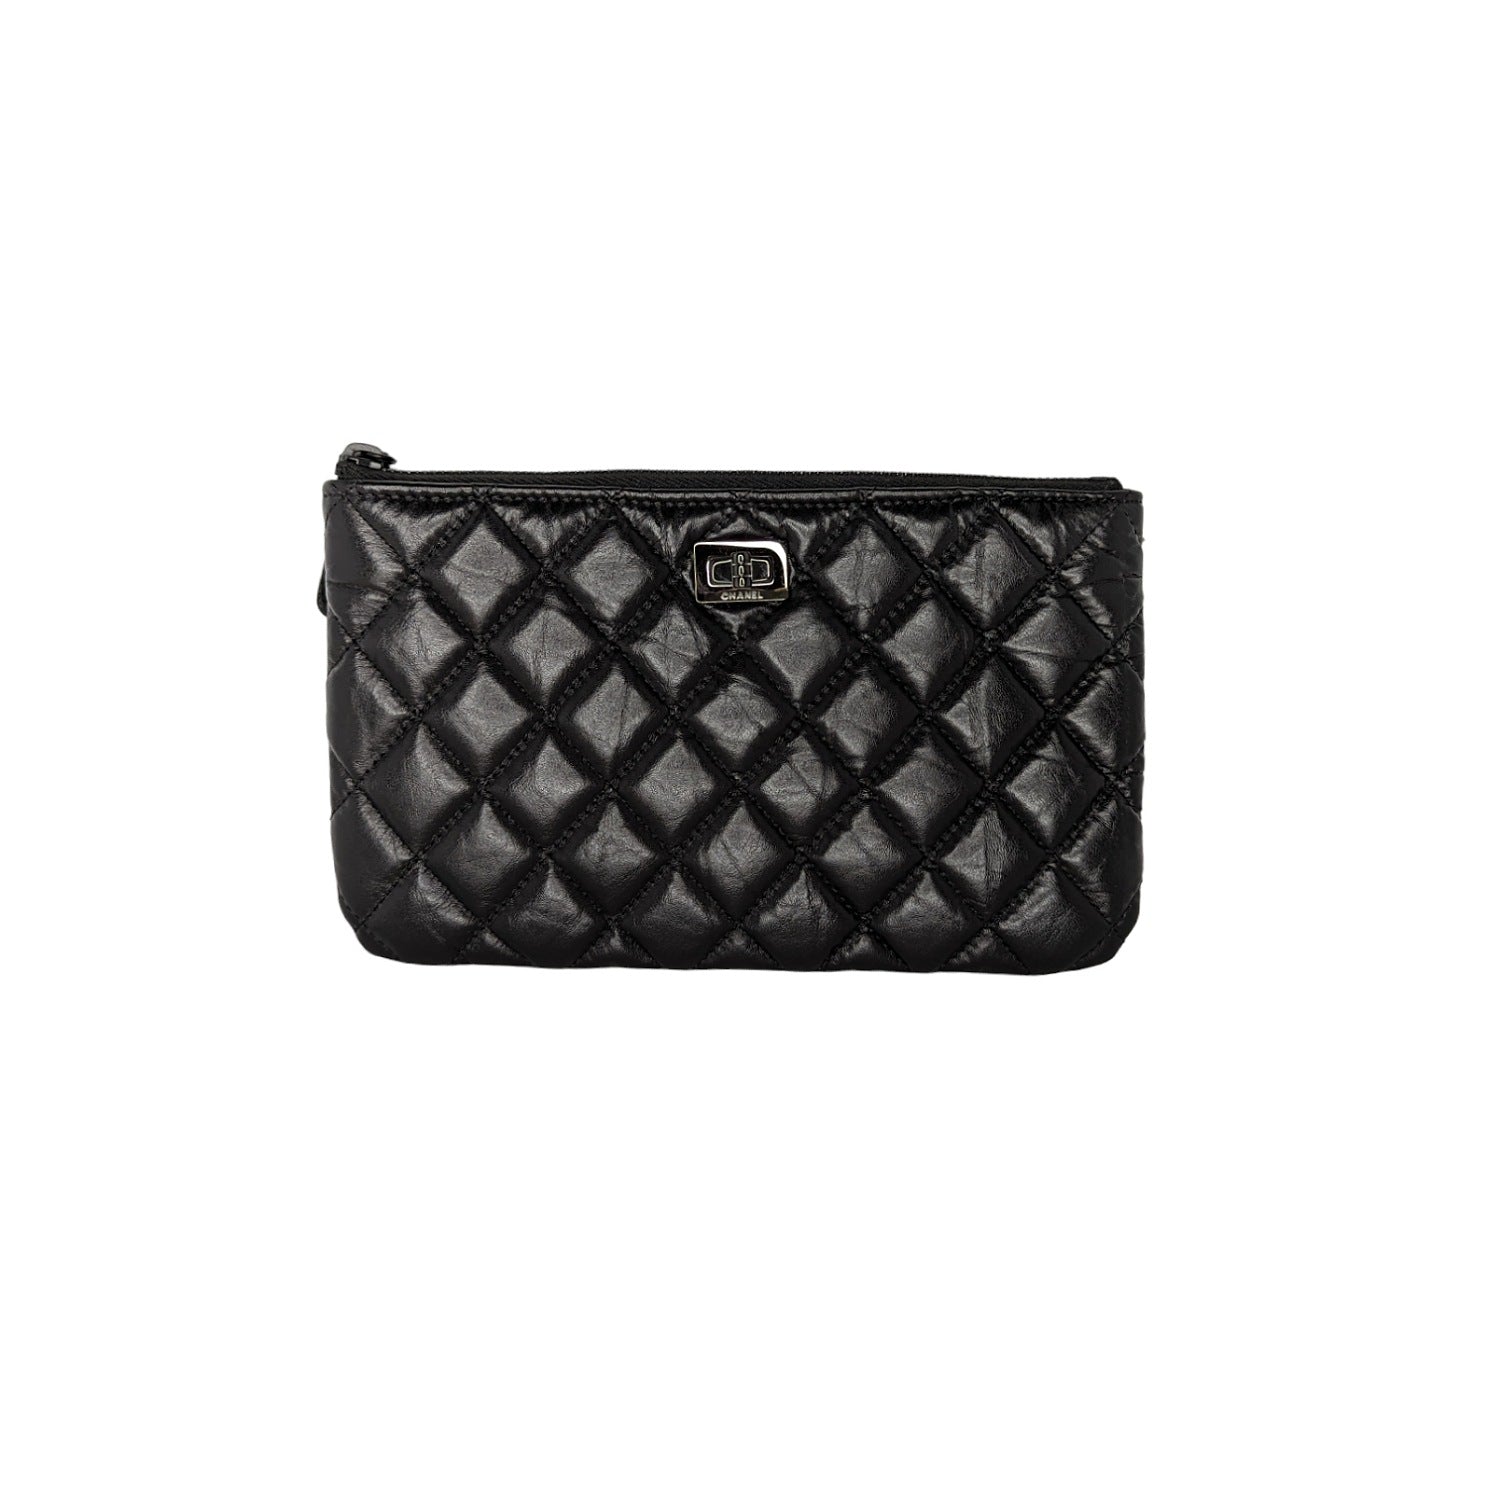 CHANEL Caviar Leather O-Case Zip Pouch Black - 10% OFF